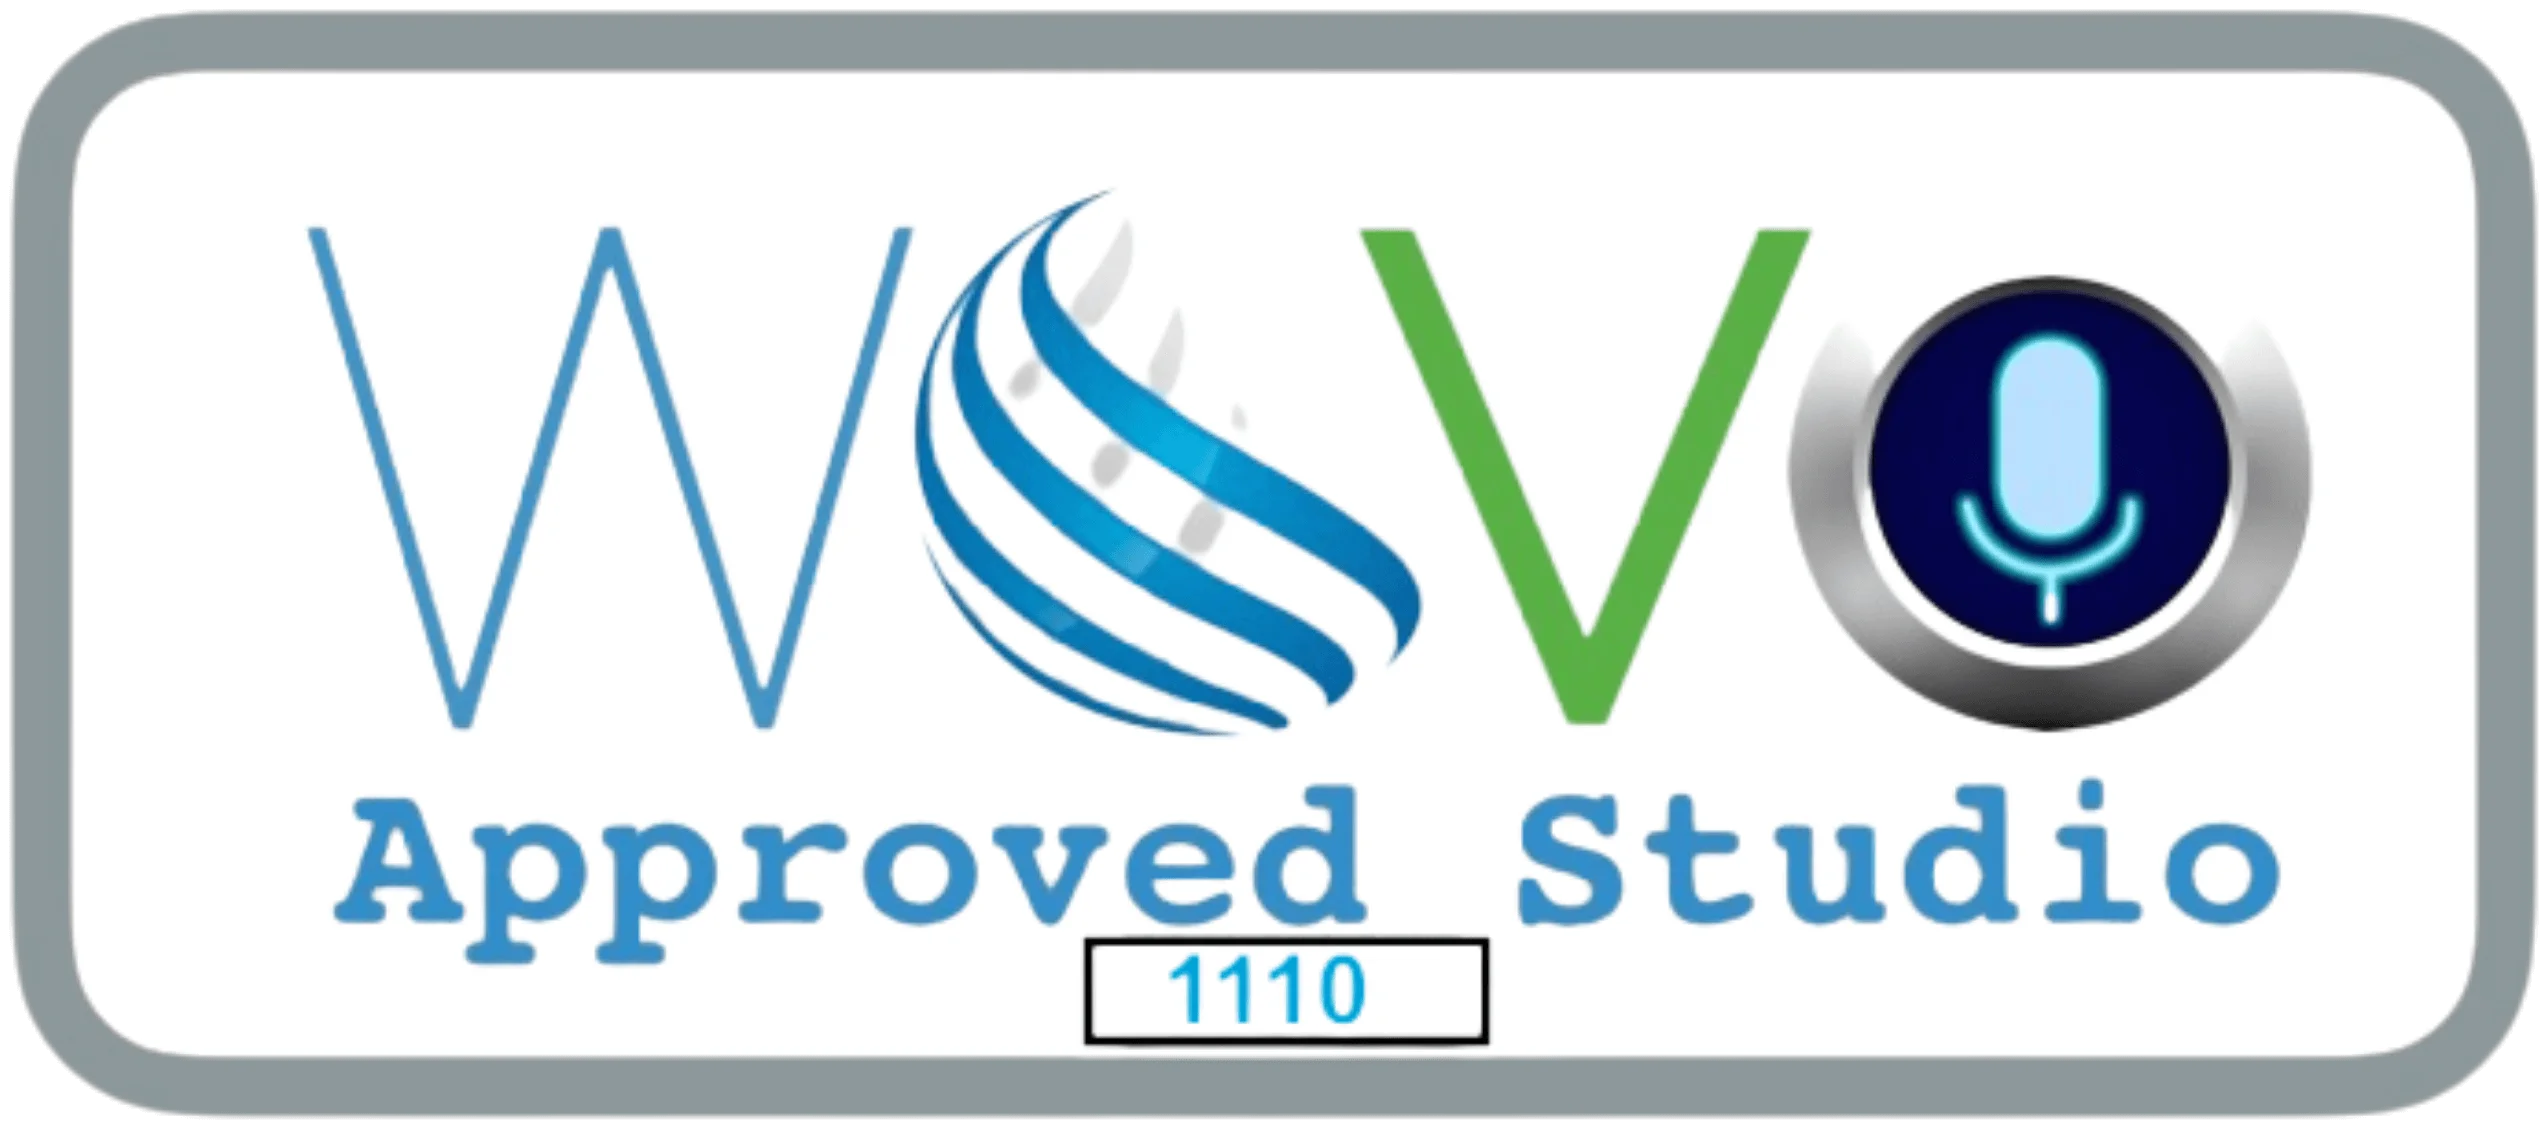 Shawn Fitzmaurice Professional Voice Actor Wovo Approved Studio